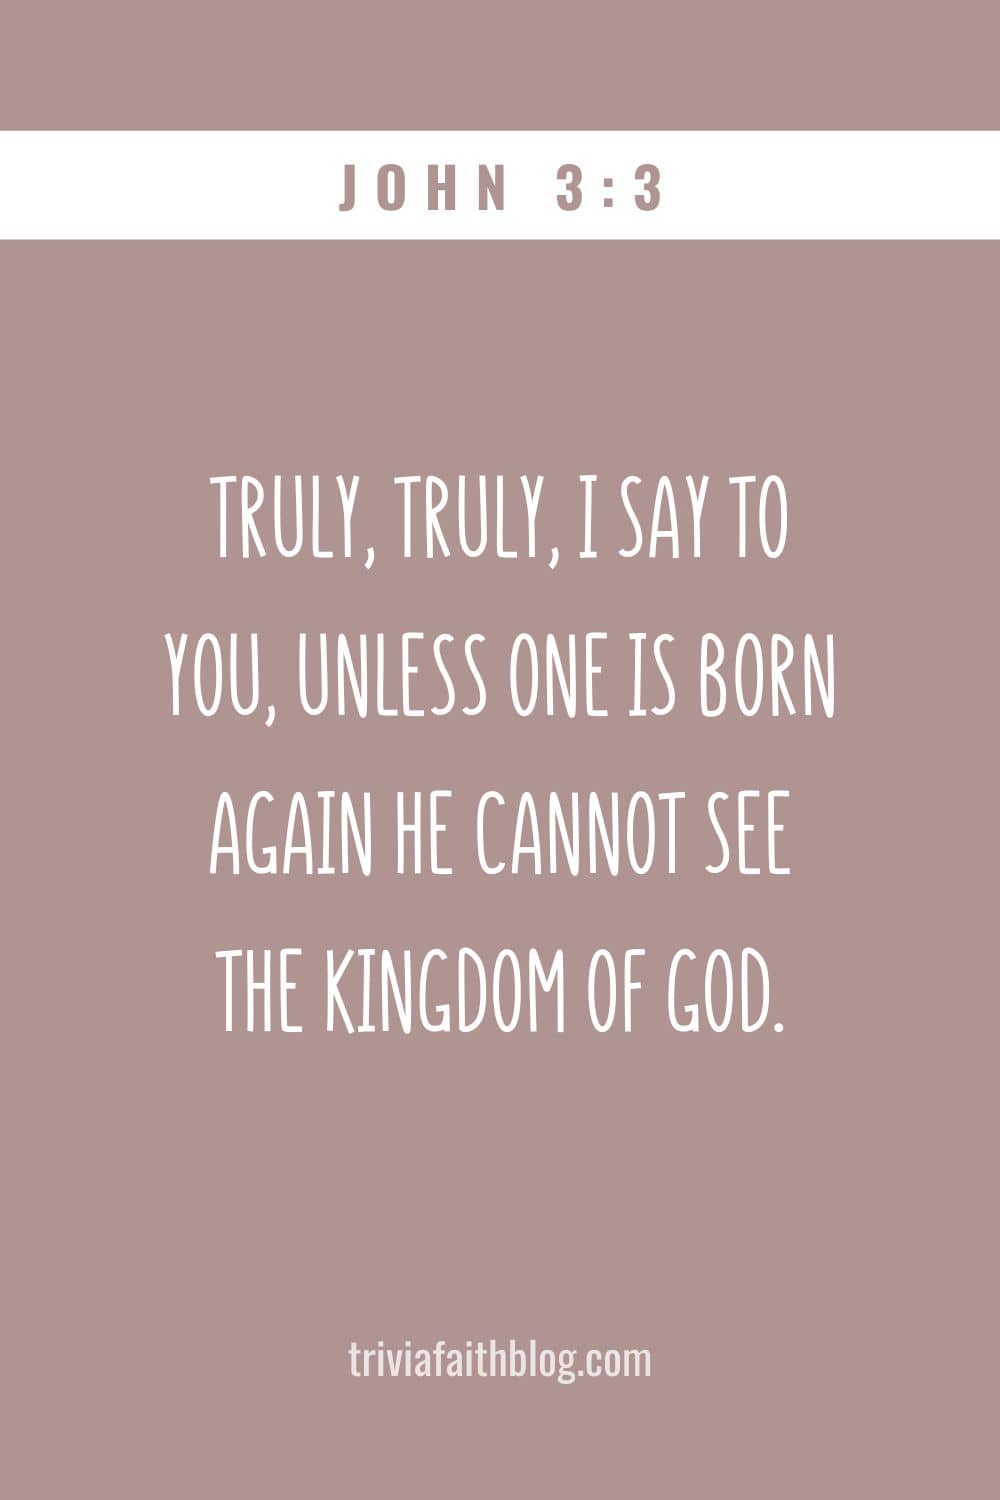 Truly, truly, I say to you, unless one is born again he cannot see the kingdom of God